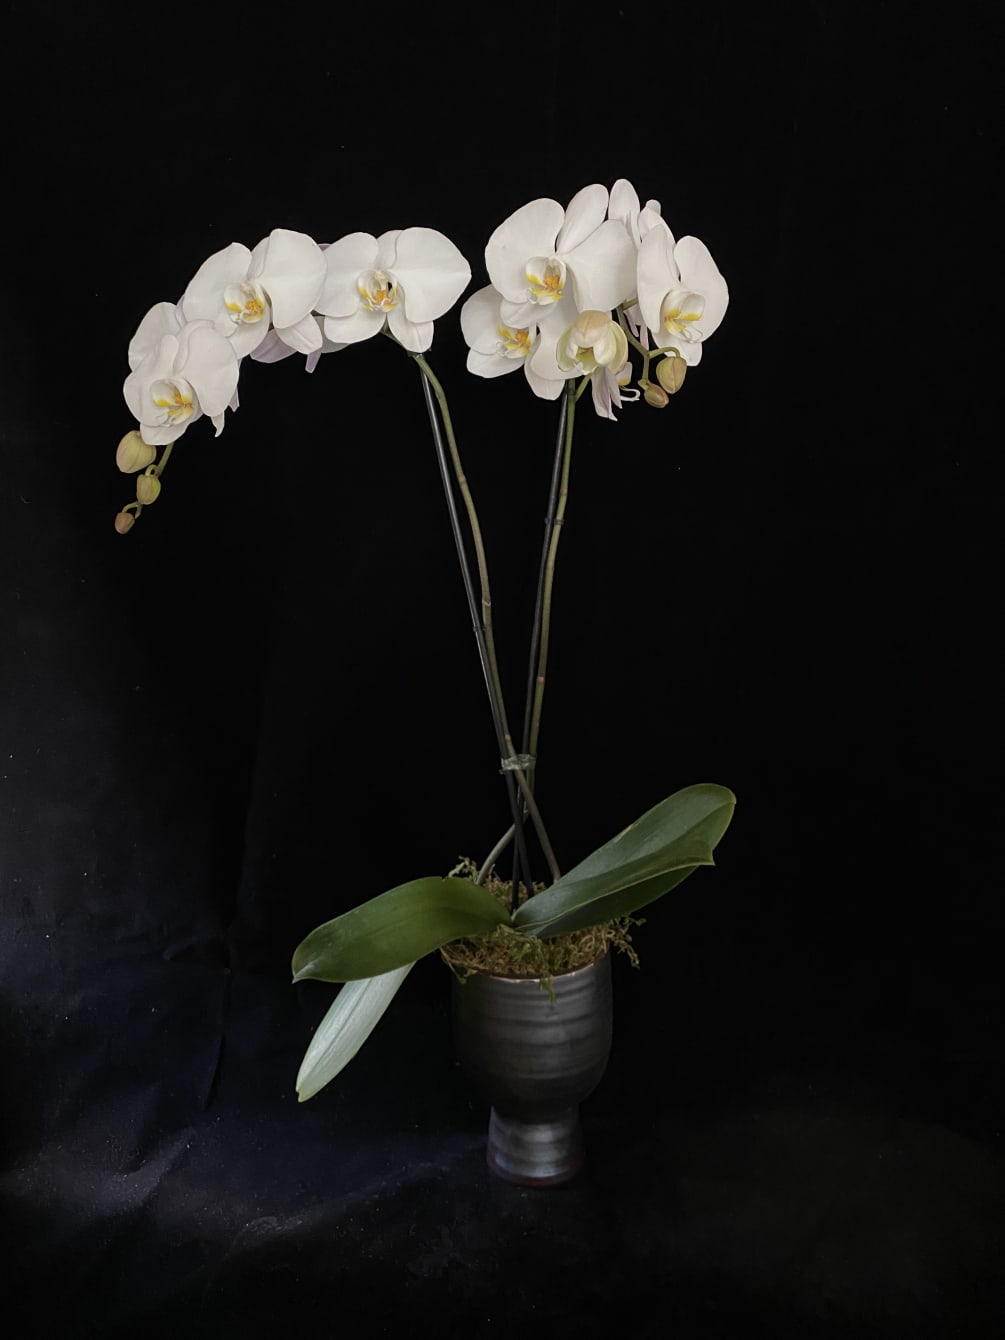 A double spiked white Phaleonopsis Orchid in a modern footed pot topped